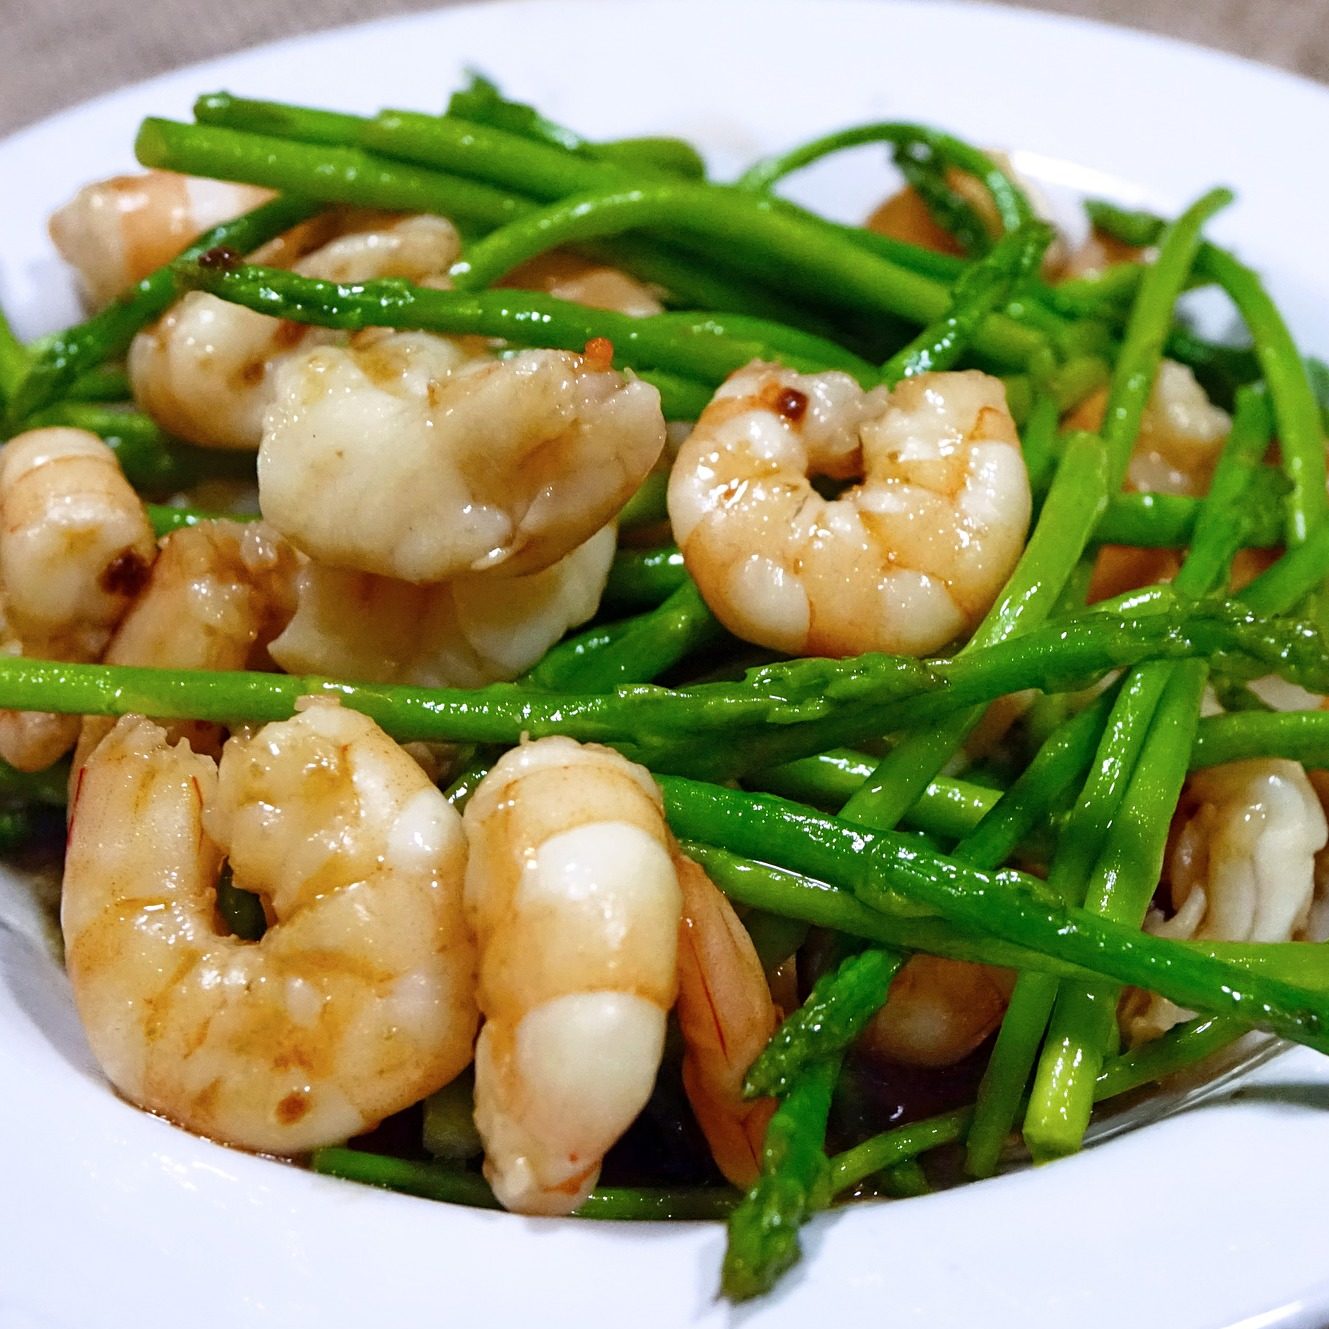 Close-up image of cooked shrimp and whole asparagus stalks